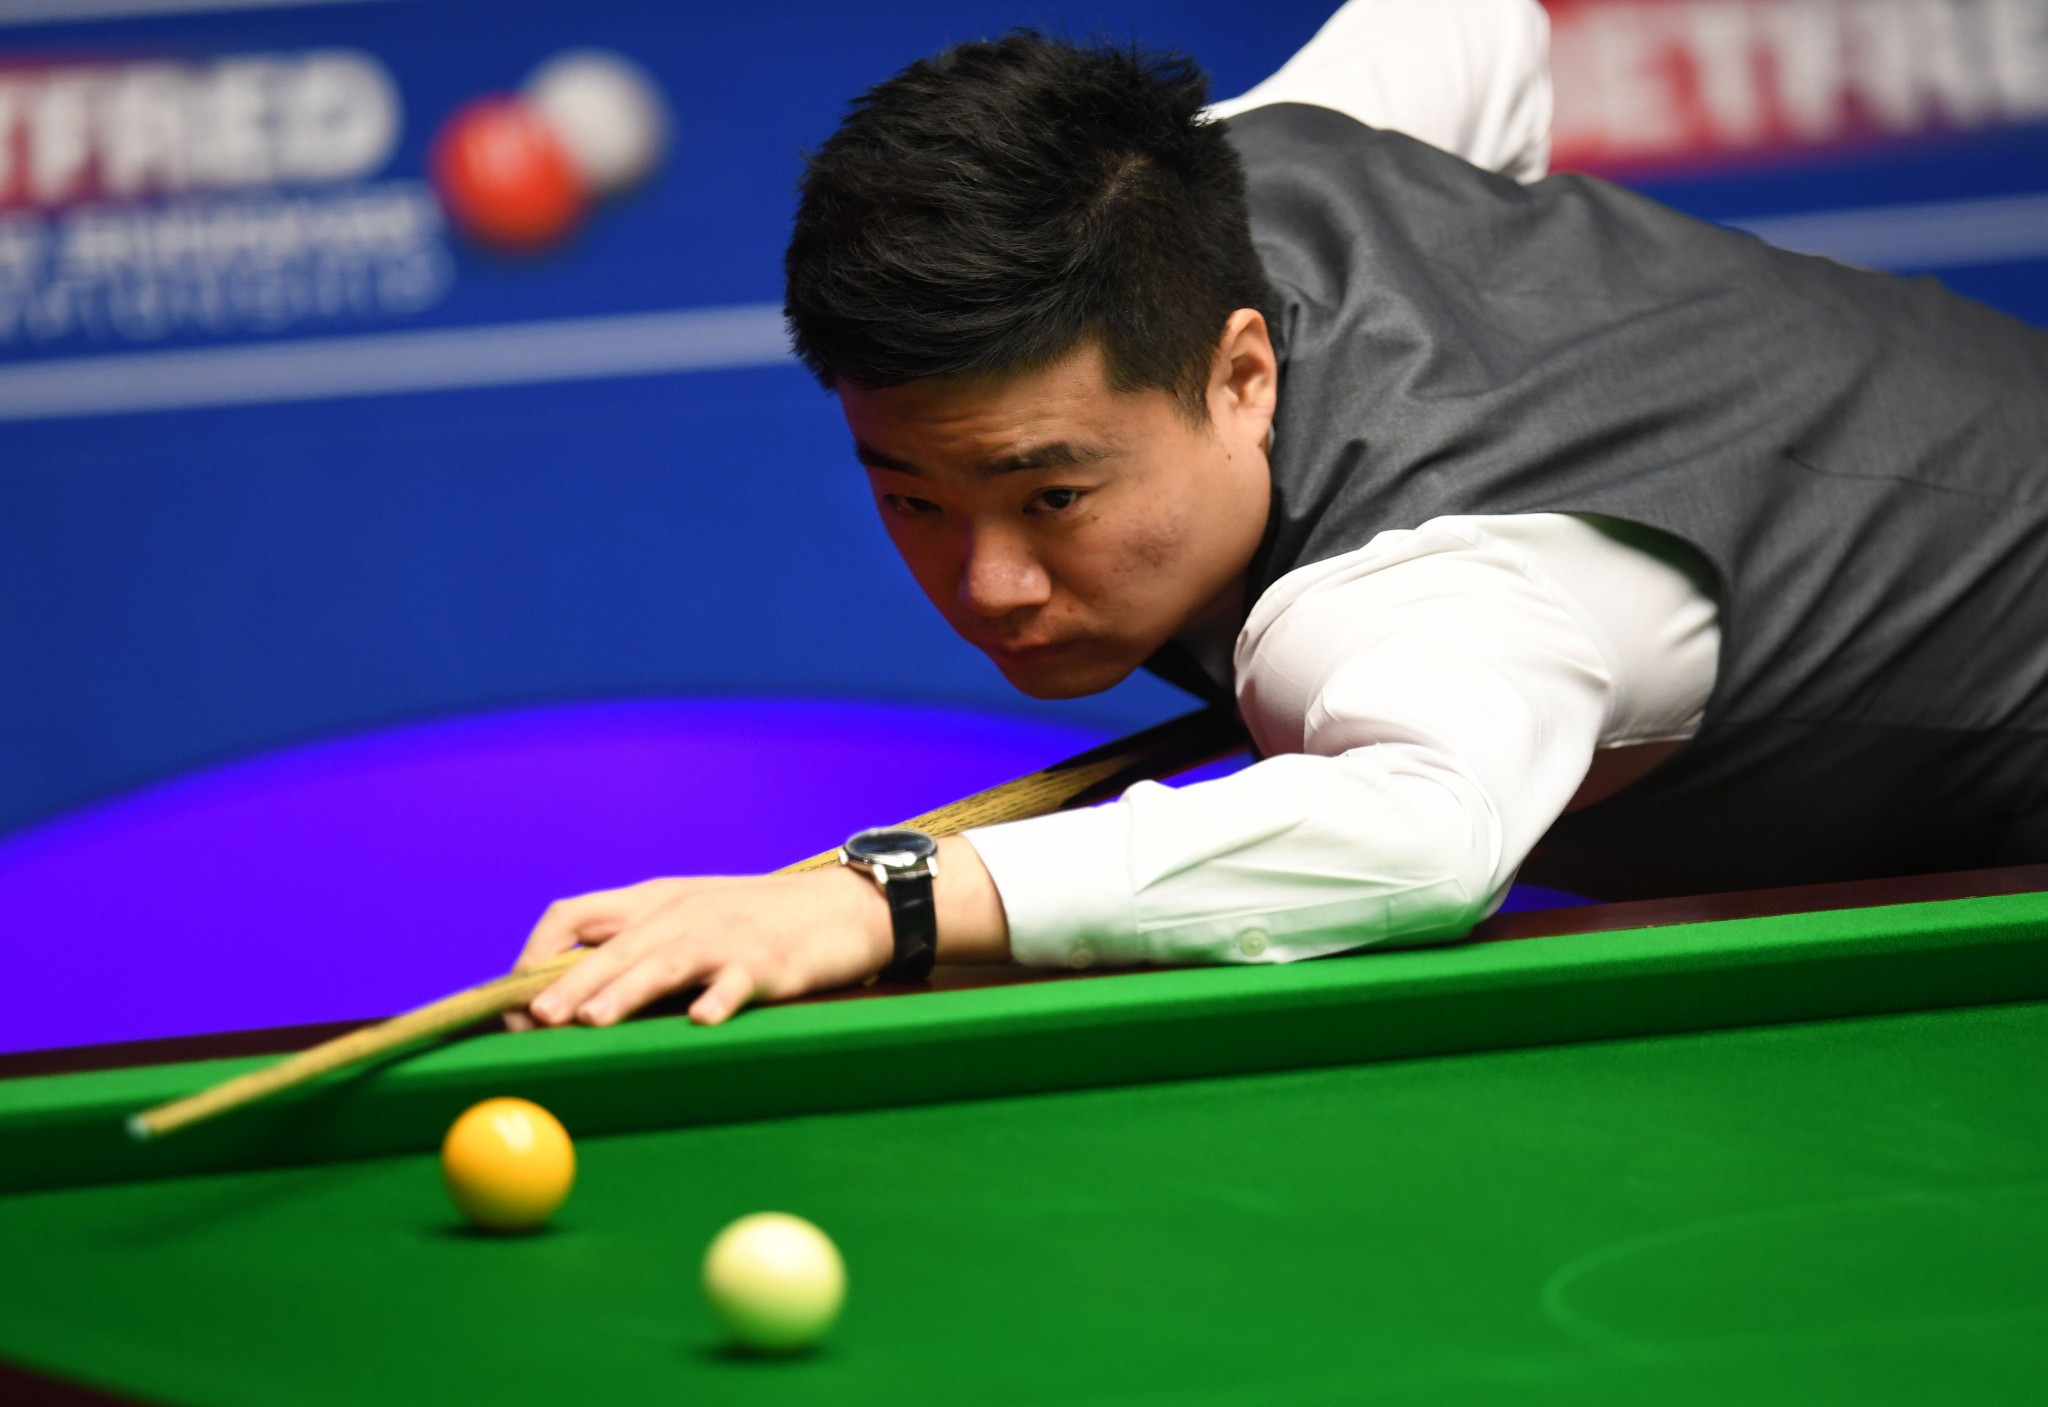 Snooker has grown rapidly in China thanks to the success of players like Ding Junhui, pictured ©Getty Images